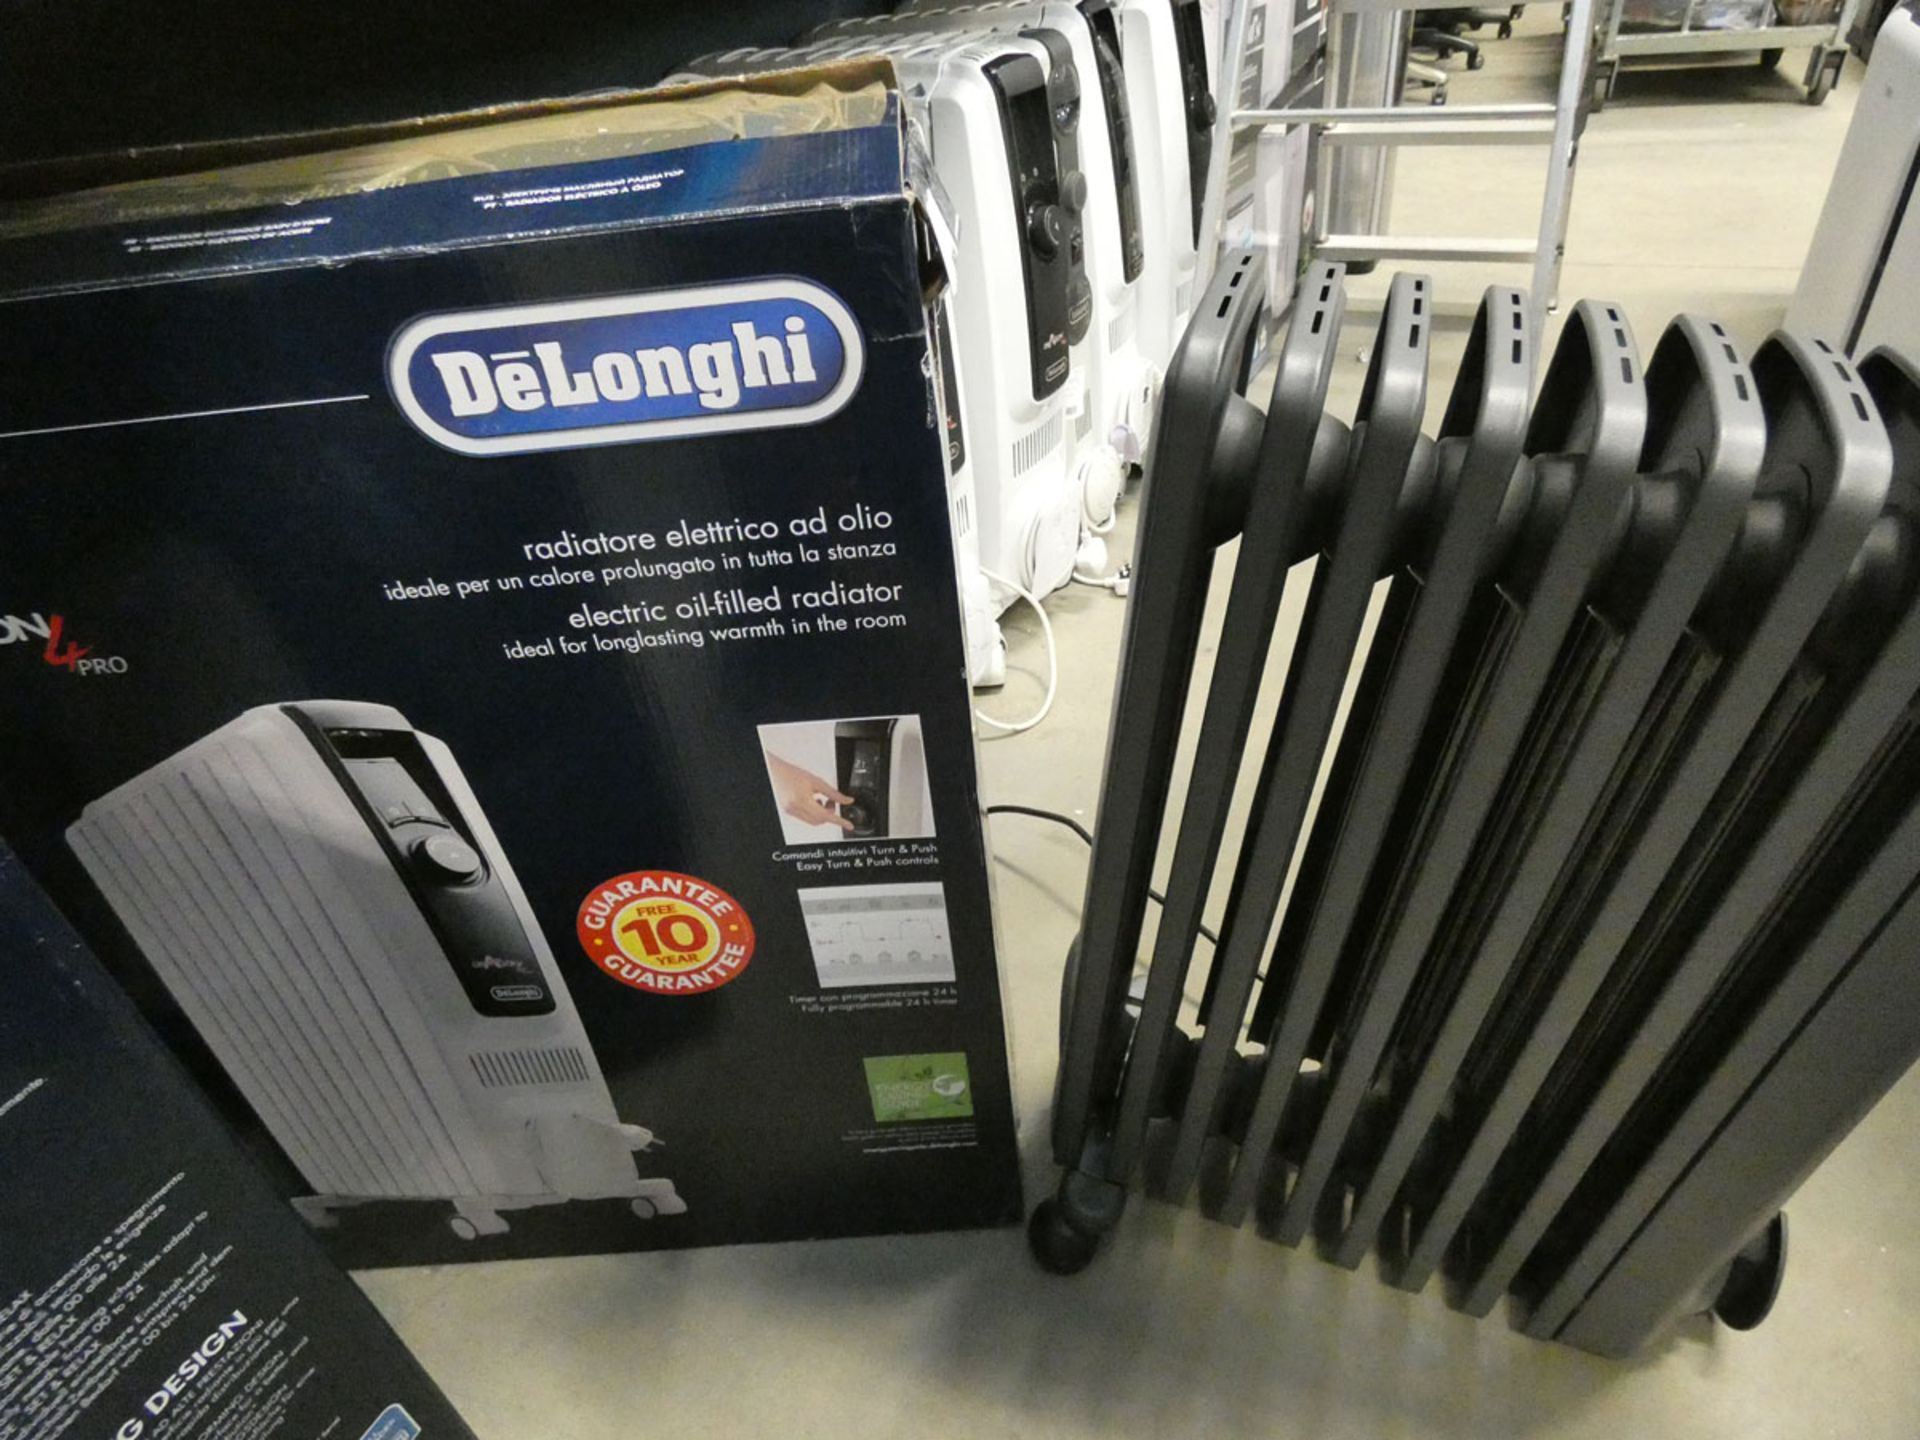 1 large boxed white Delonghi oil filled radiator, and 1 unboxed grey radiator